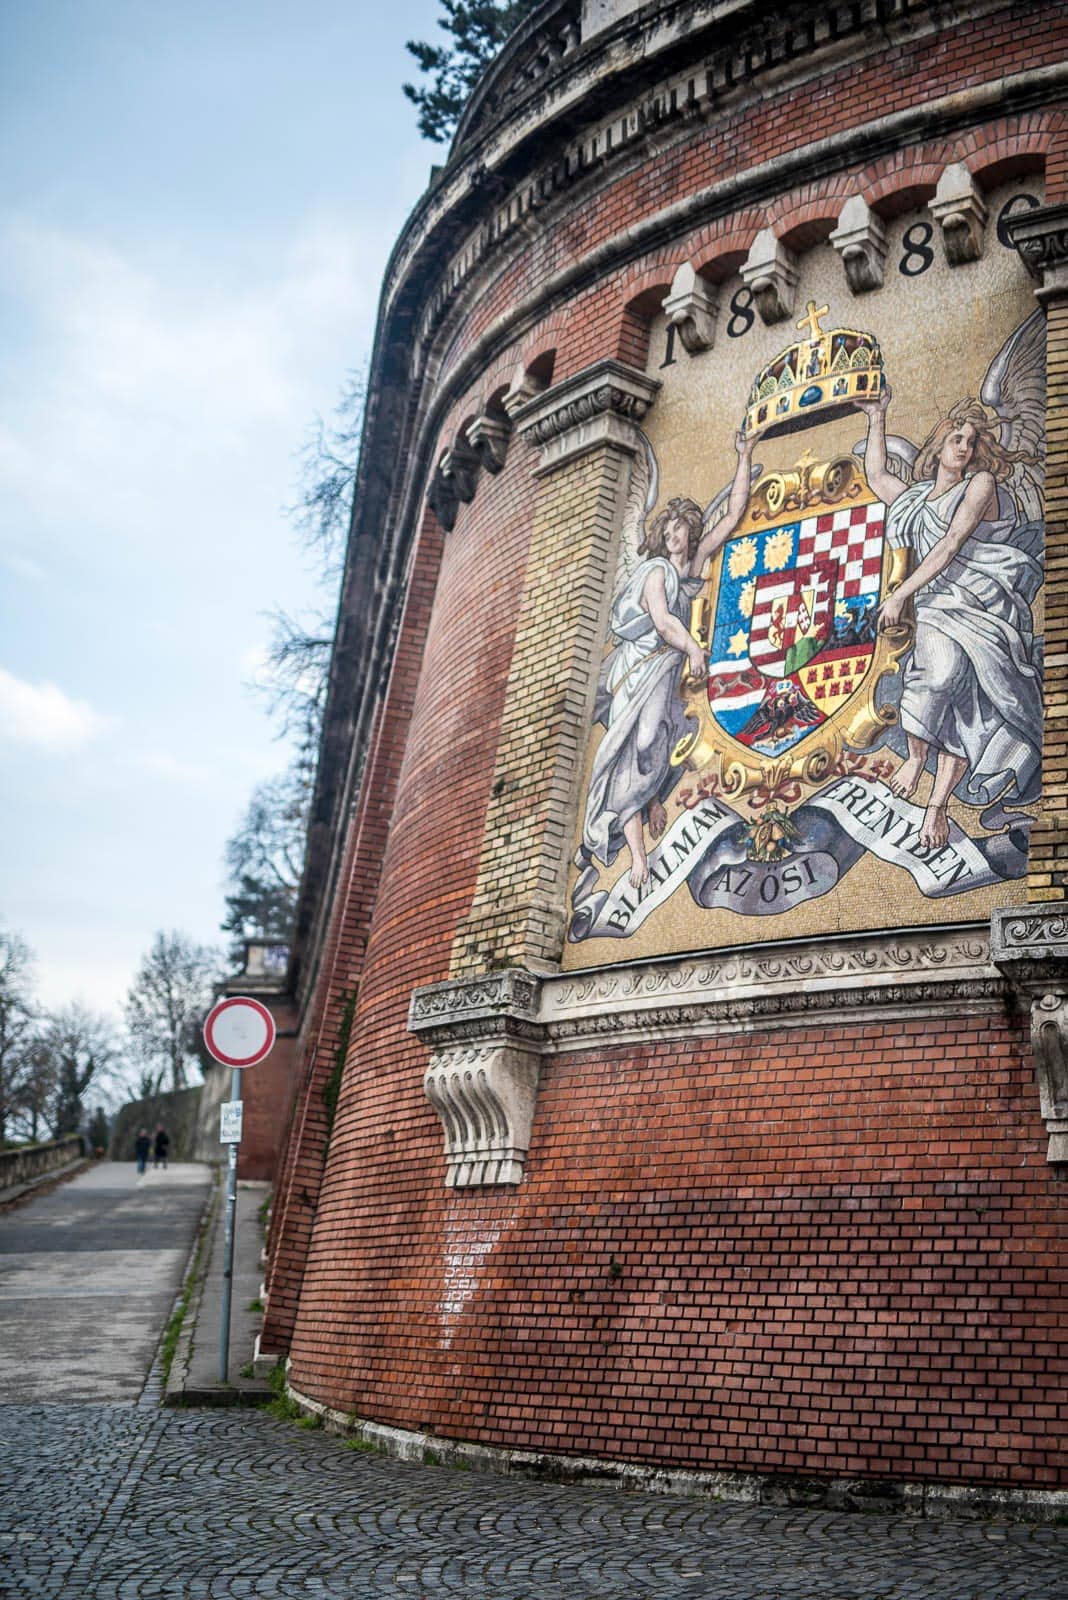 A brick wall with a coat of arms on it.